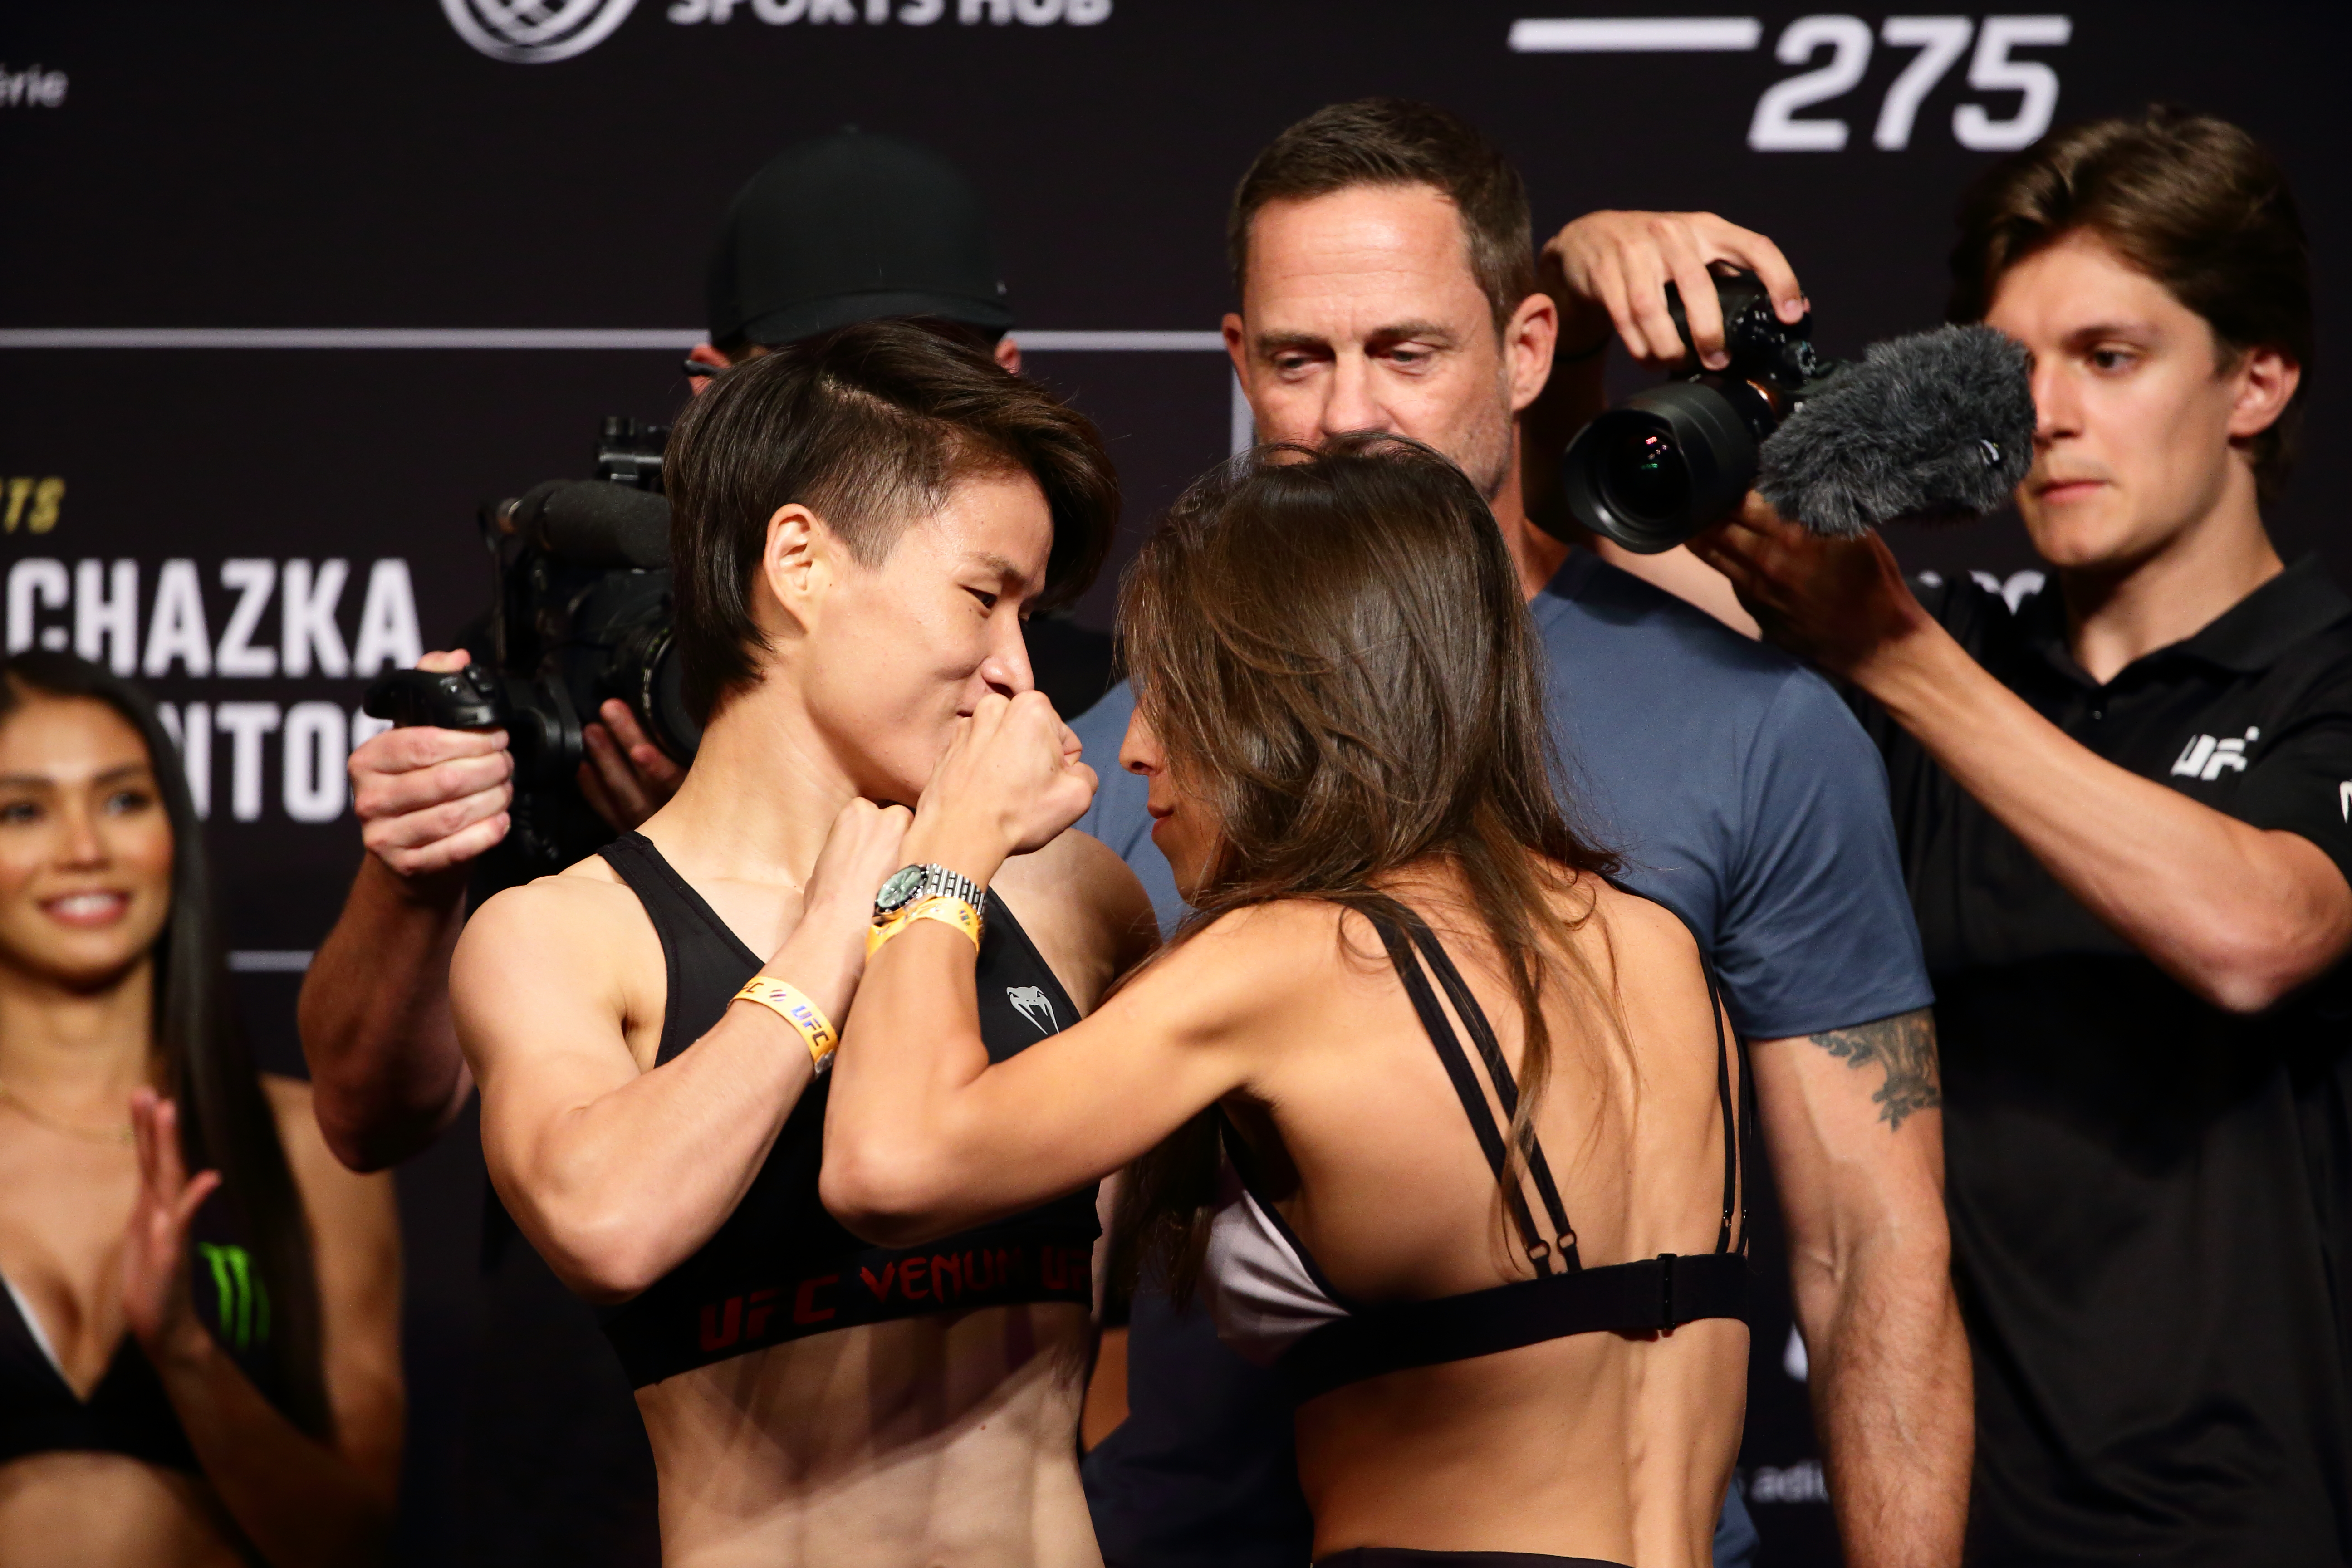 Zhang Weili of China (L) and Joanna Jedrzejczyk&nbsp;of Poland (R) face off during the UFC 275 Weigh-Ins at Singapore Indoor Stadium on June 10, 2022 in Singapore.